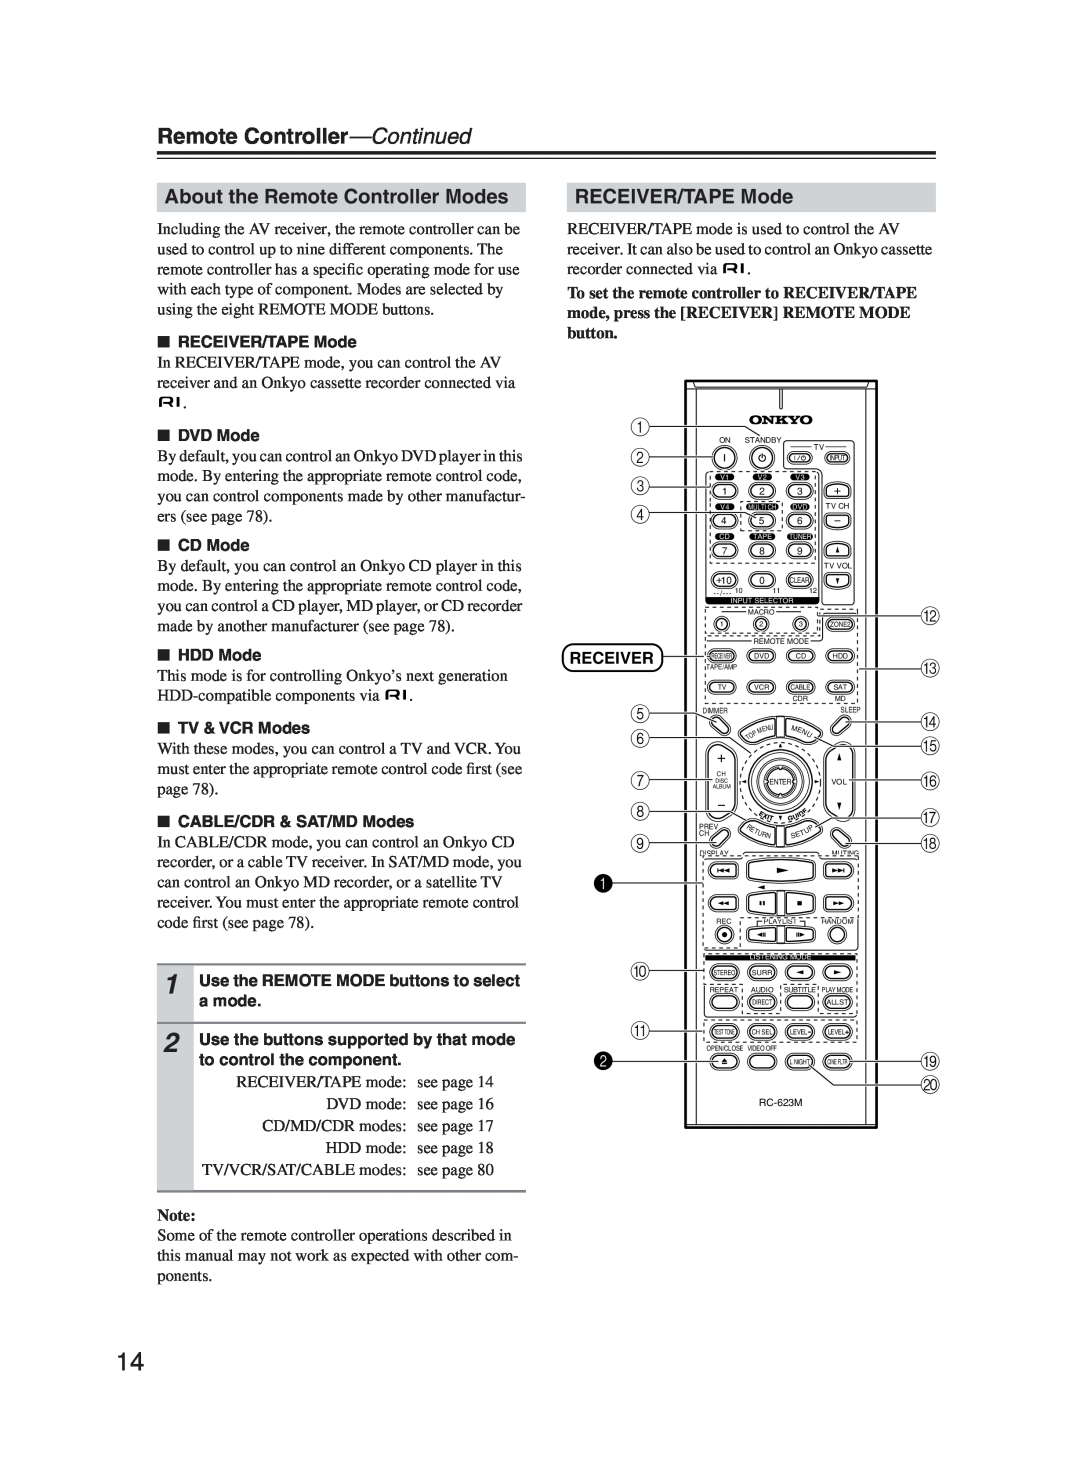 Onkyo TX-SR603X instruction manual Remote Controller—Continued, About the Remote Controller Modes, RECEIVER/TAPE Mode 